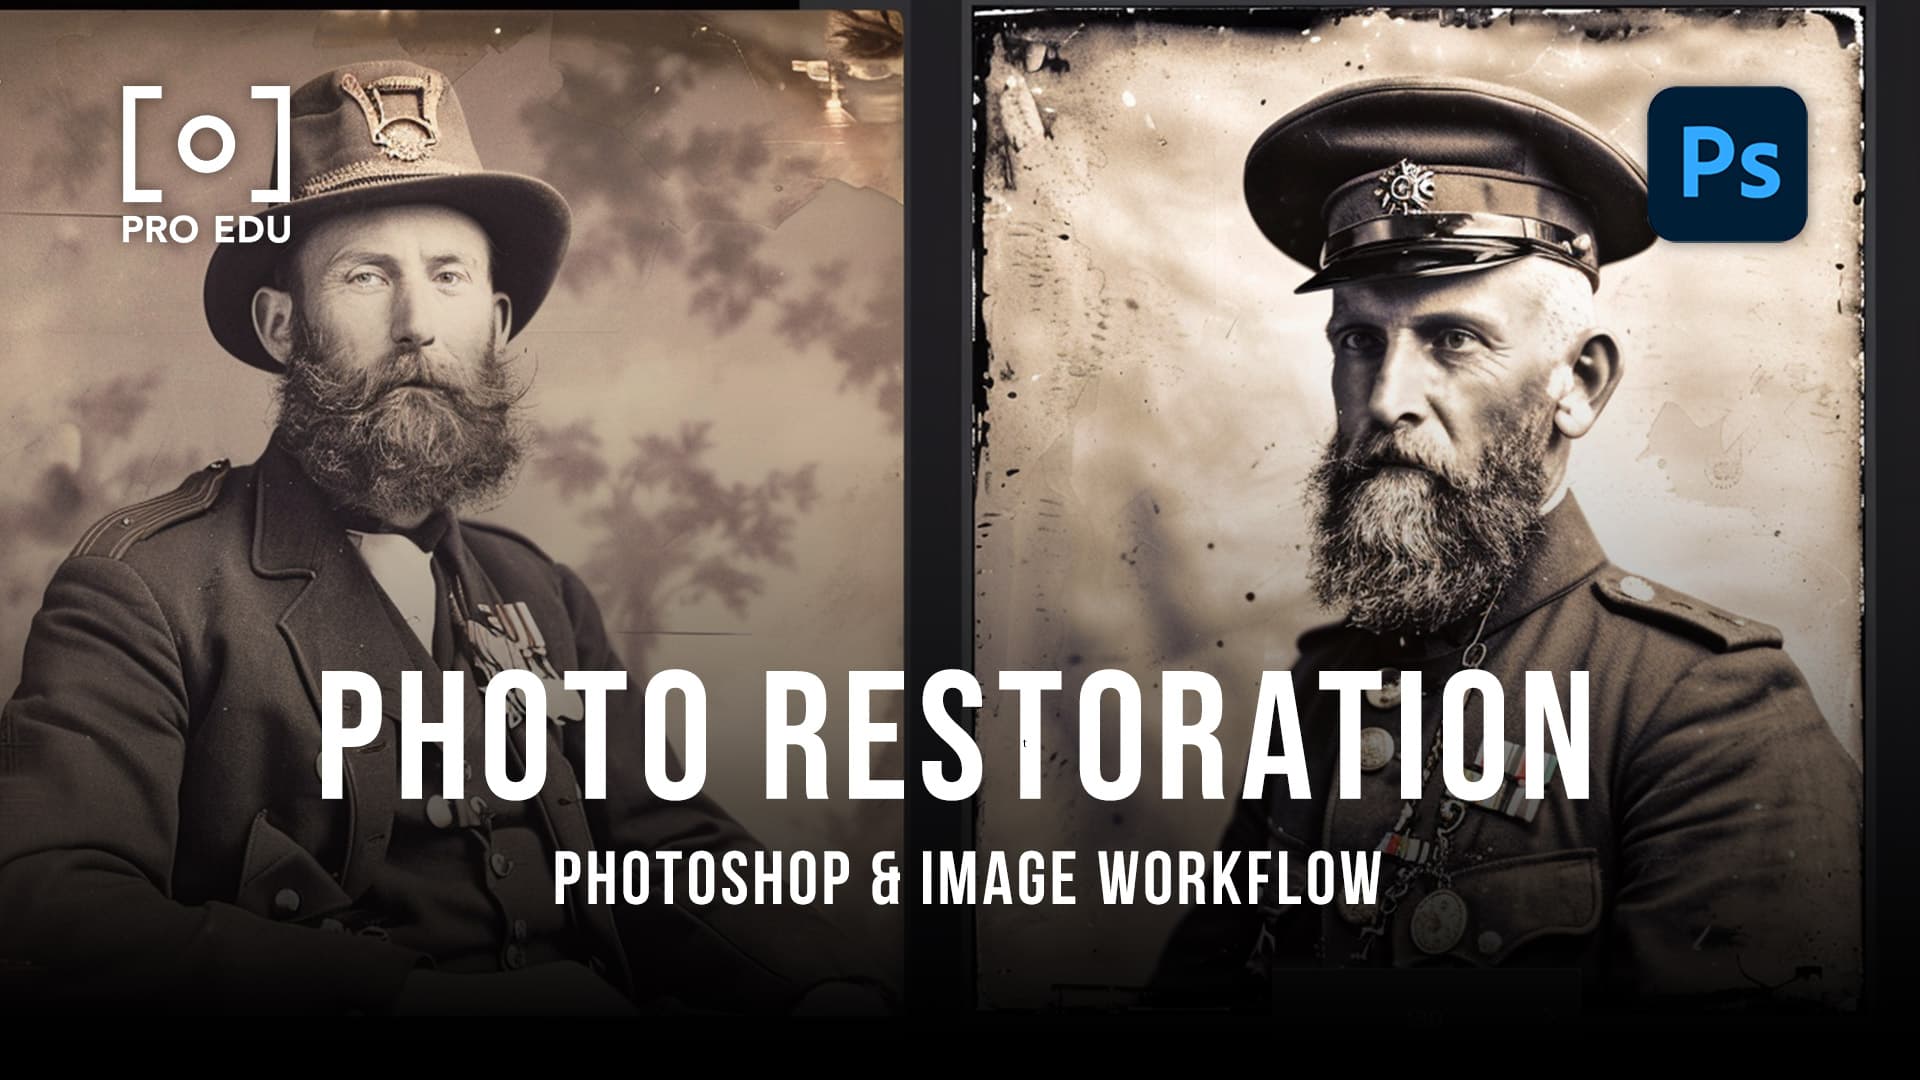 restored historic photo with vibrant colors in Photoshop